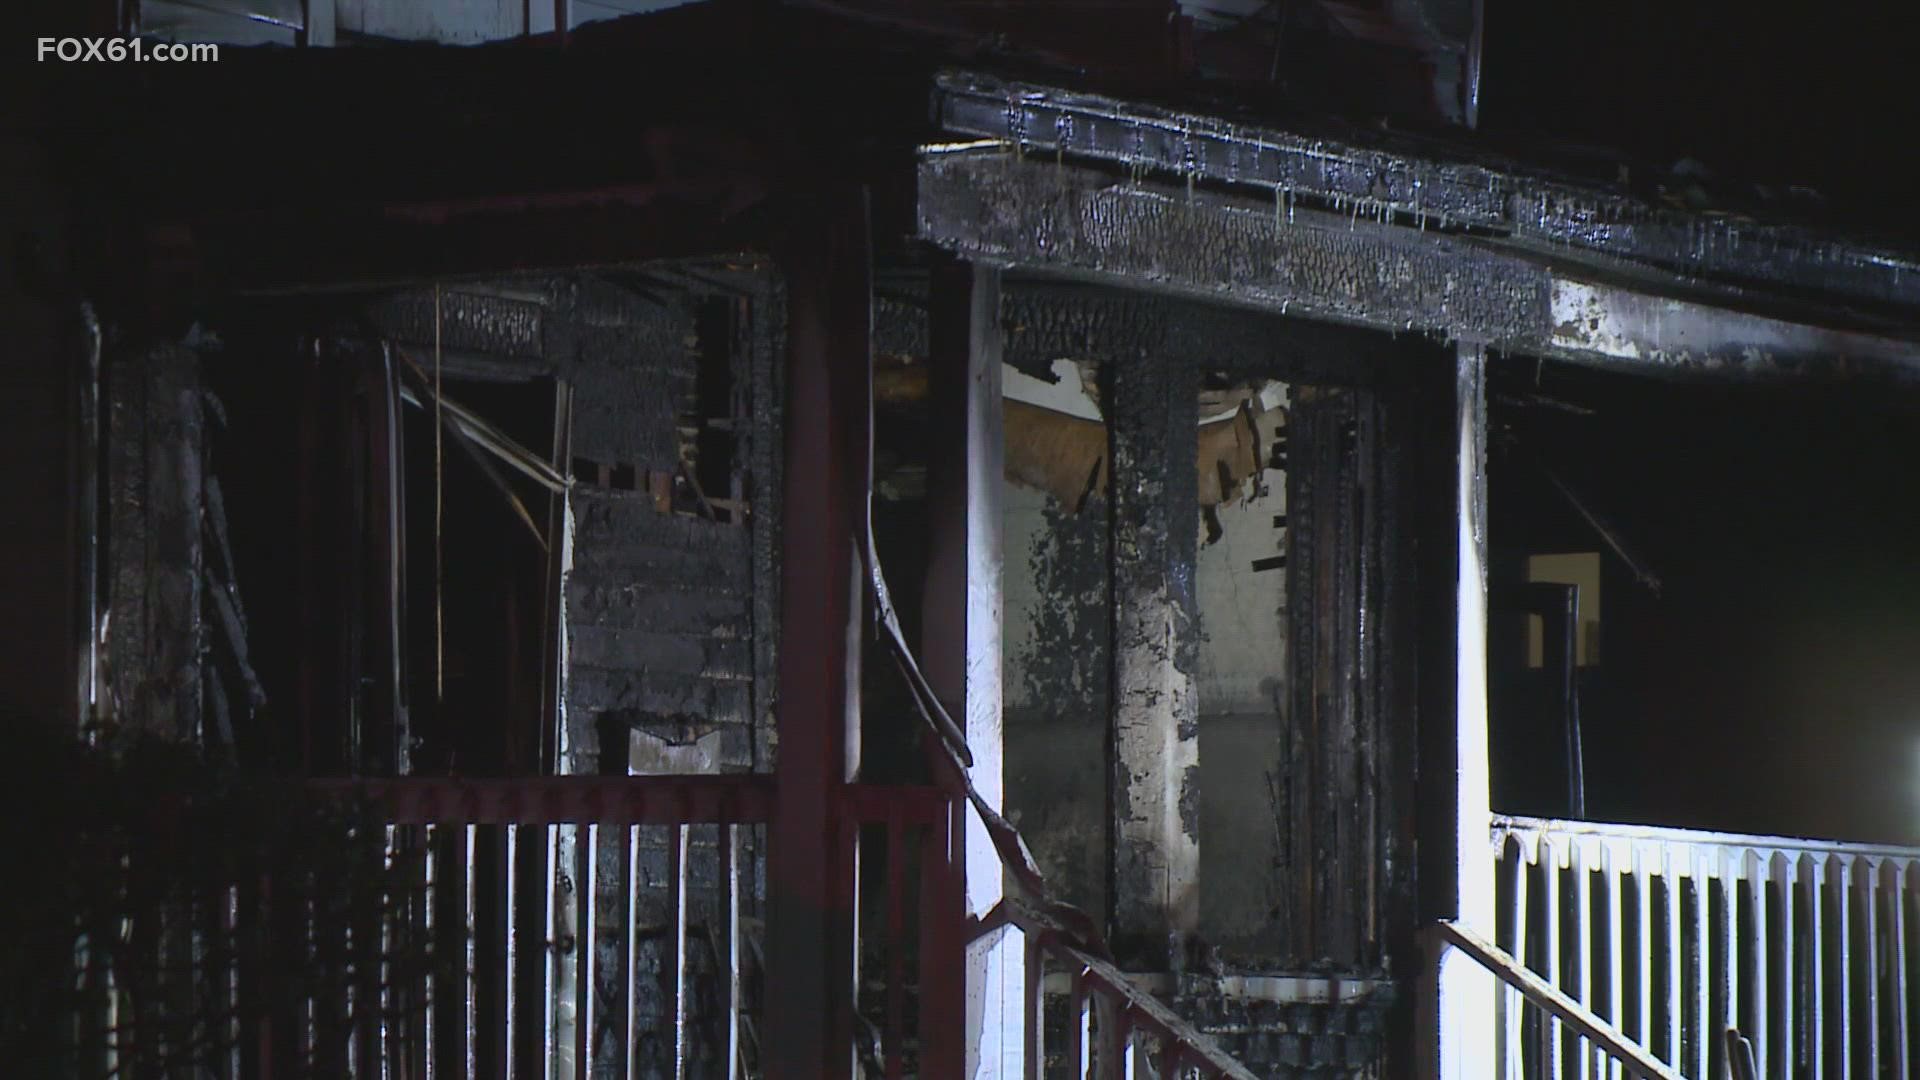 A New Haven family has been displaced just days before Christmas after their house caught fire overnight.